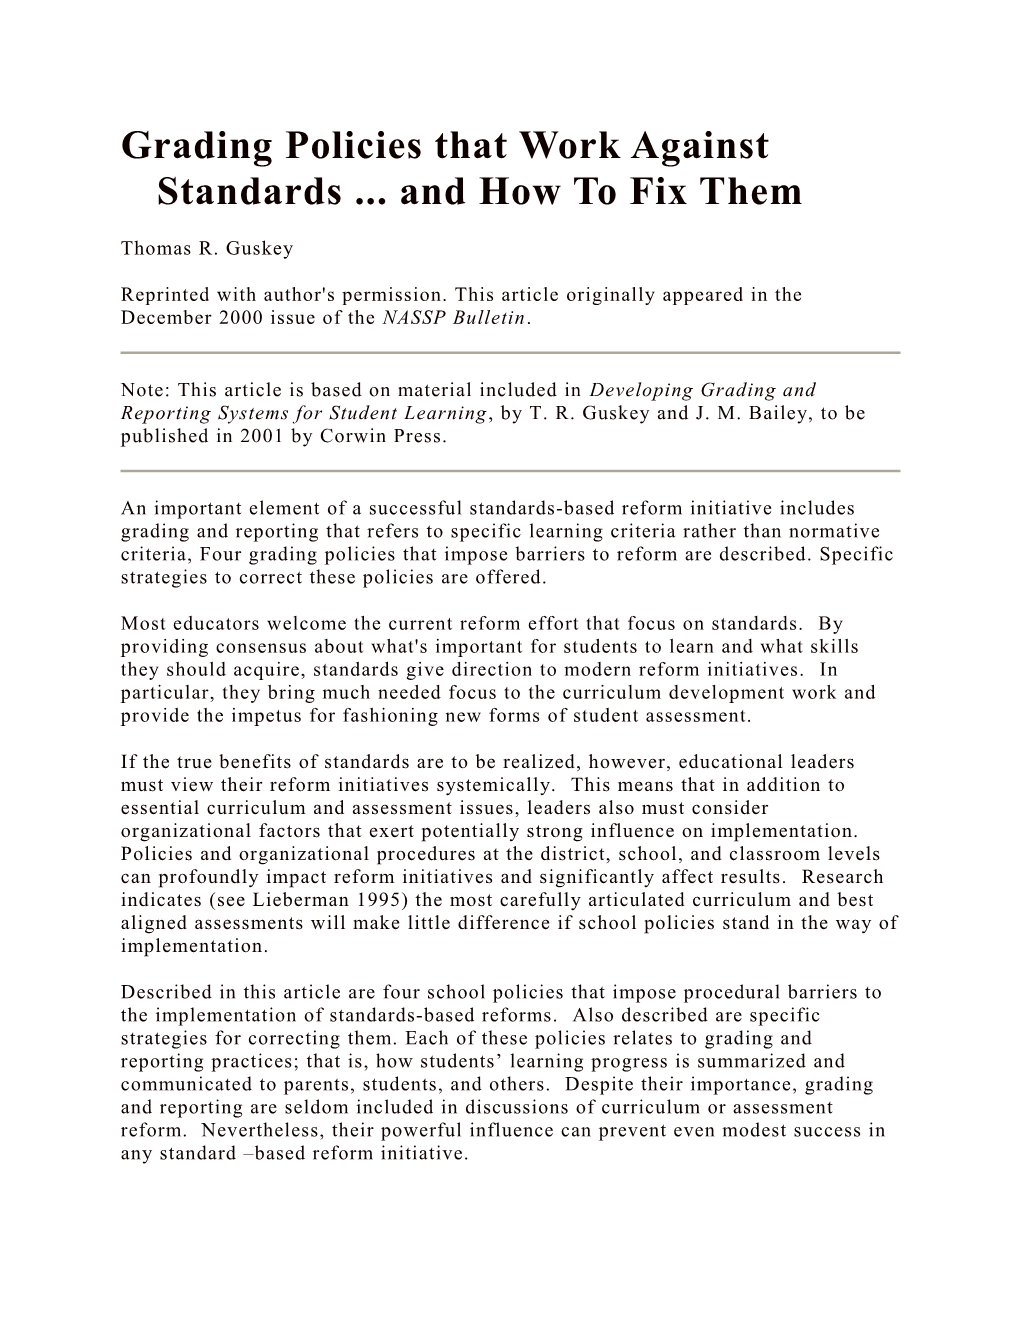 Grading Policies That Work Against Standards